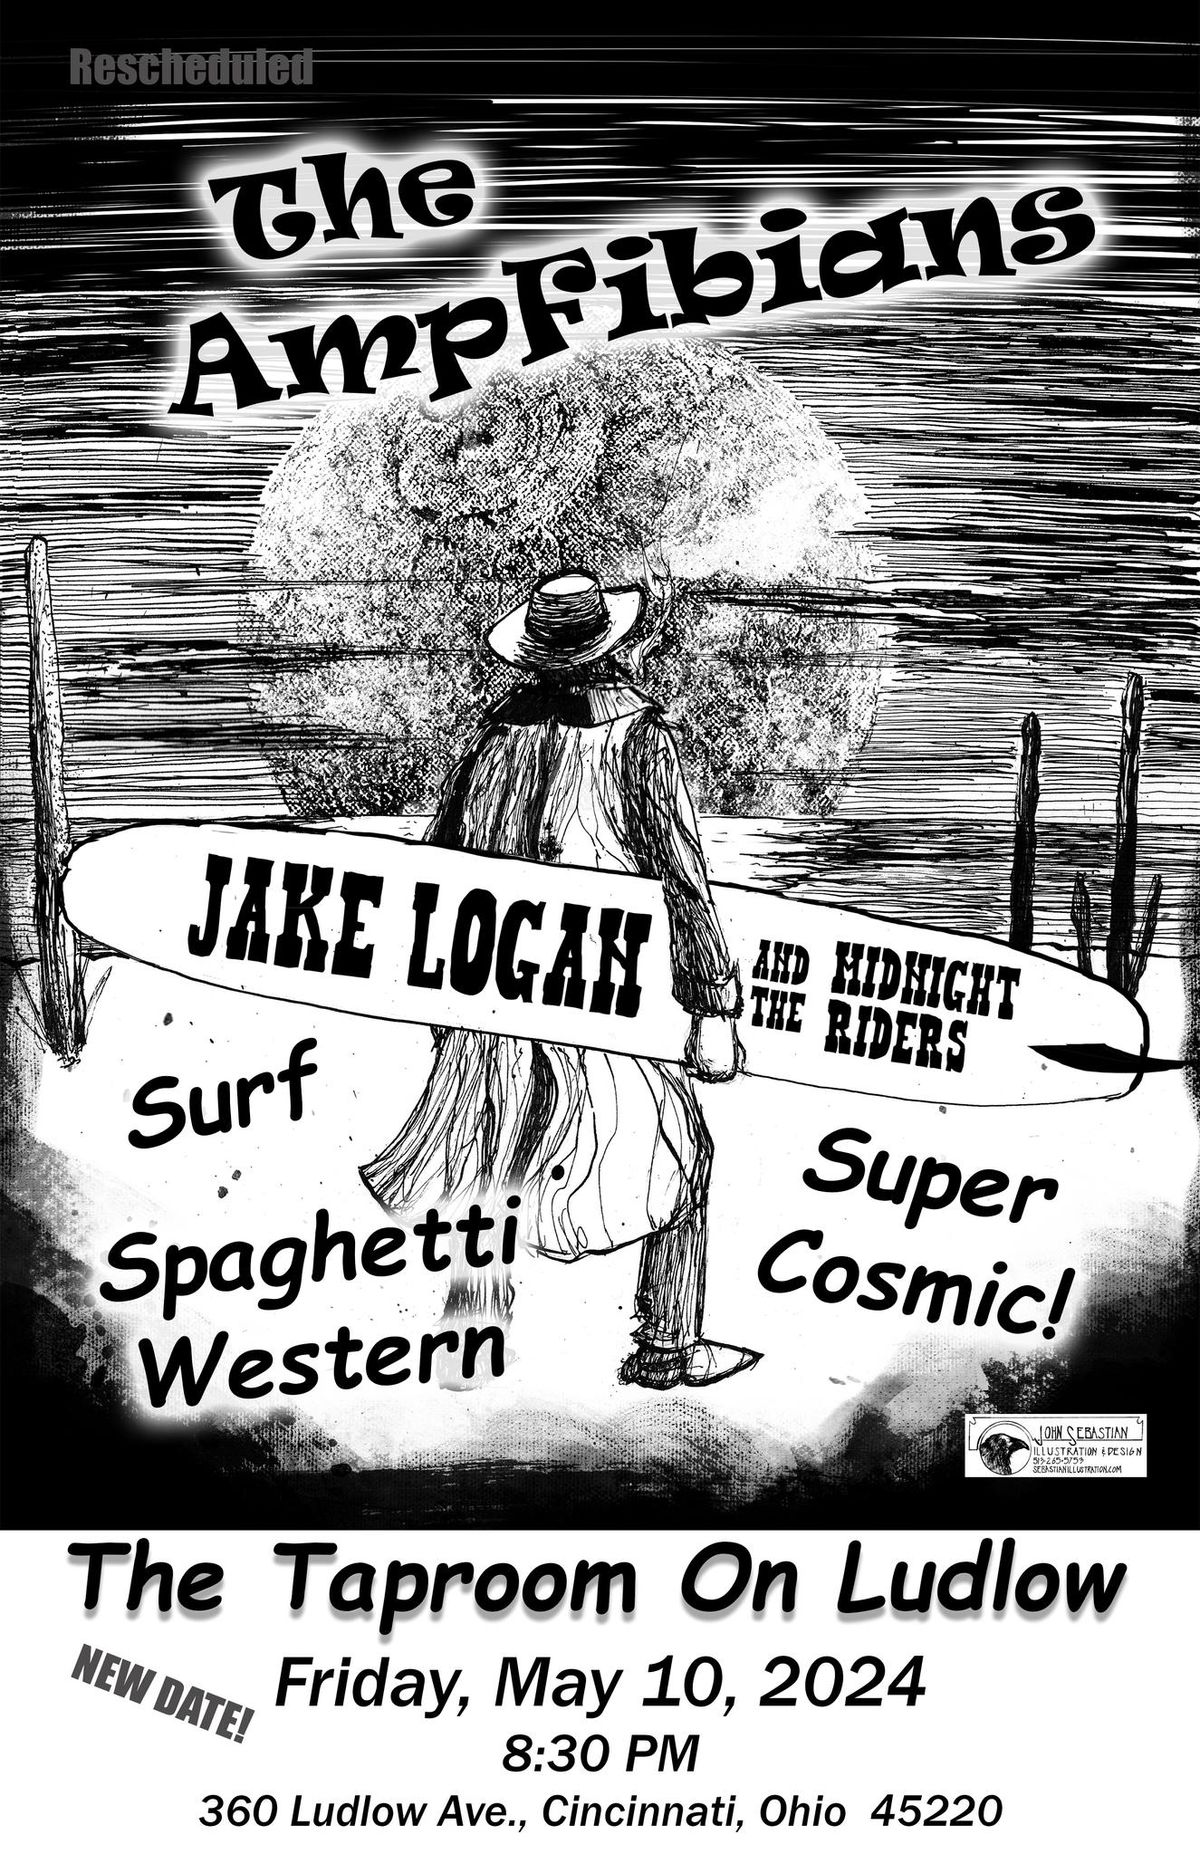 DATE CHANGE:  The AmpFibians with Jake Logan and the Midnight Riders